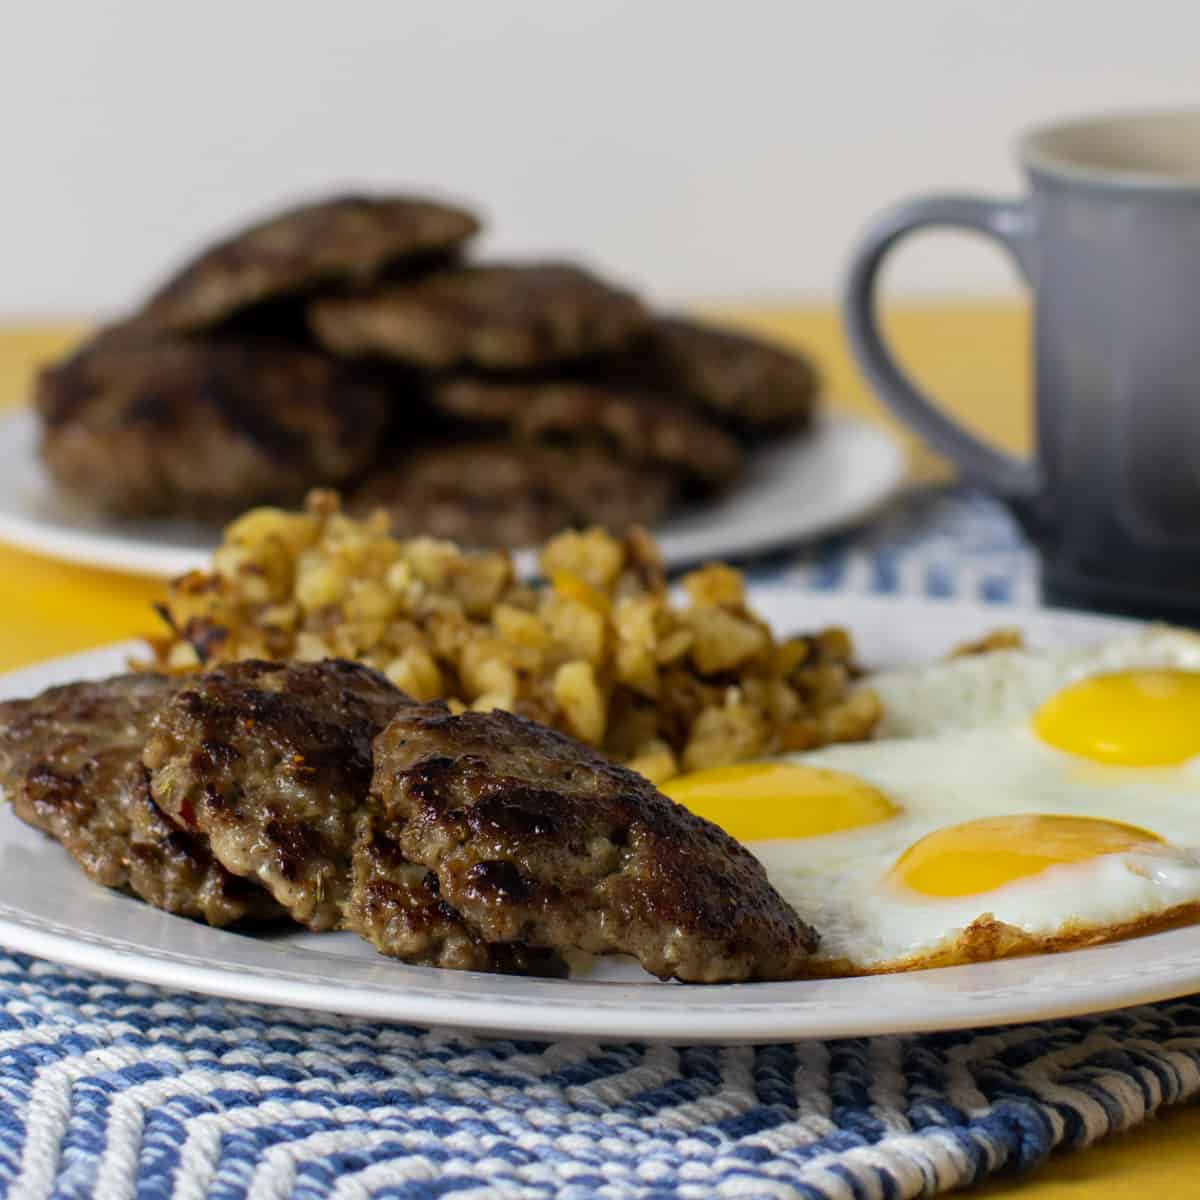 A plate of sausage patties, eggs and hash browns.